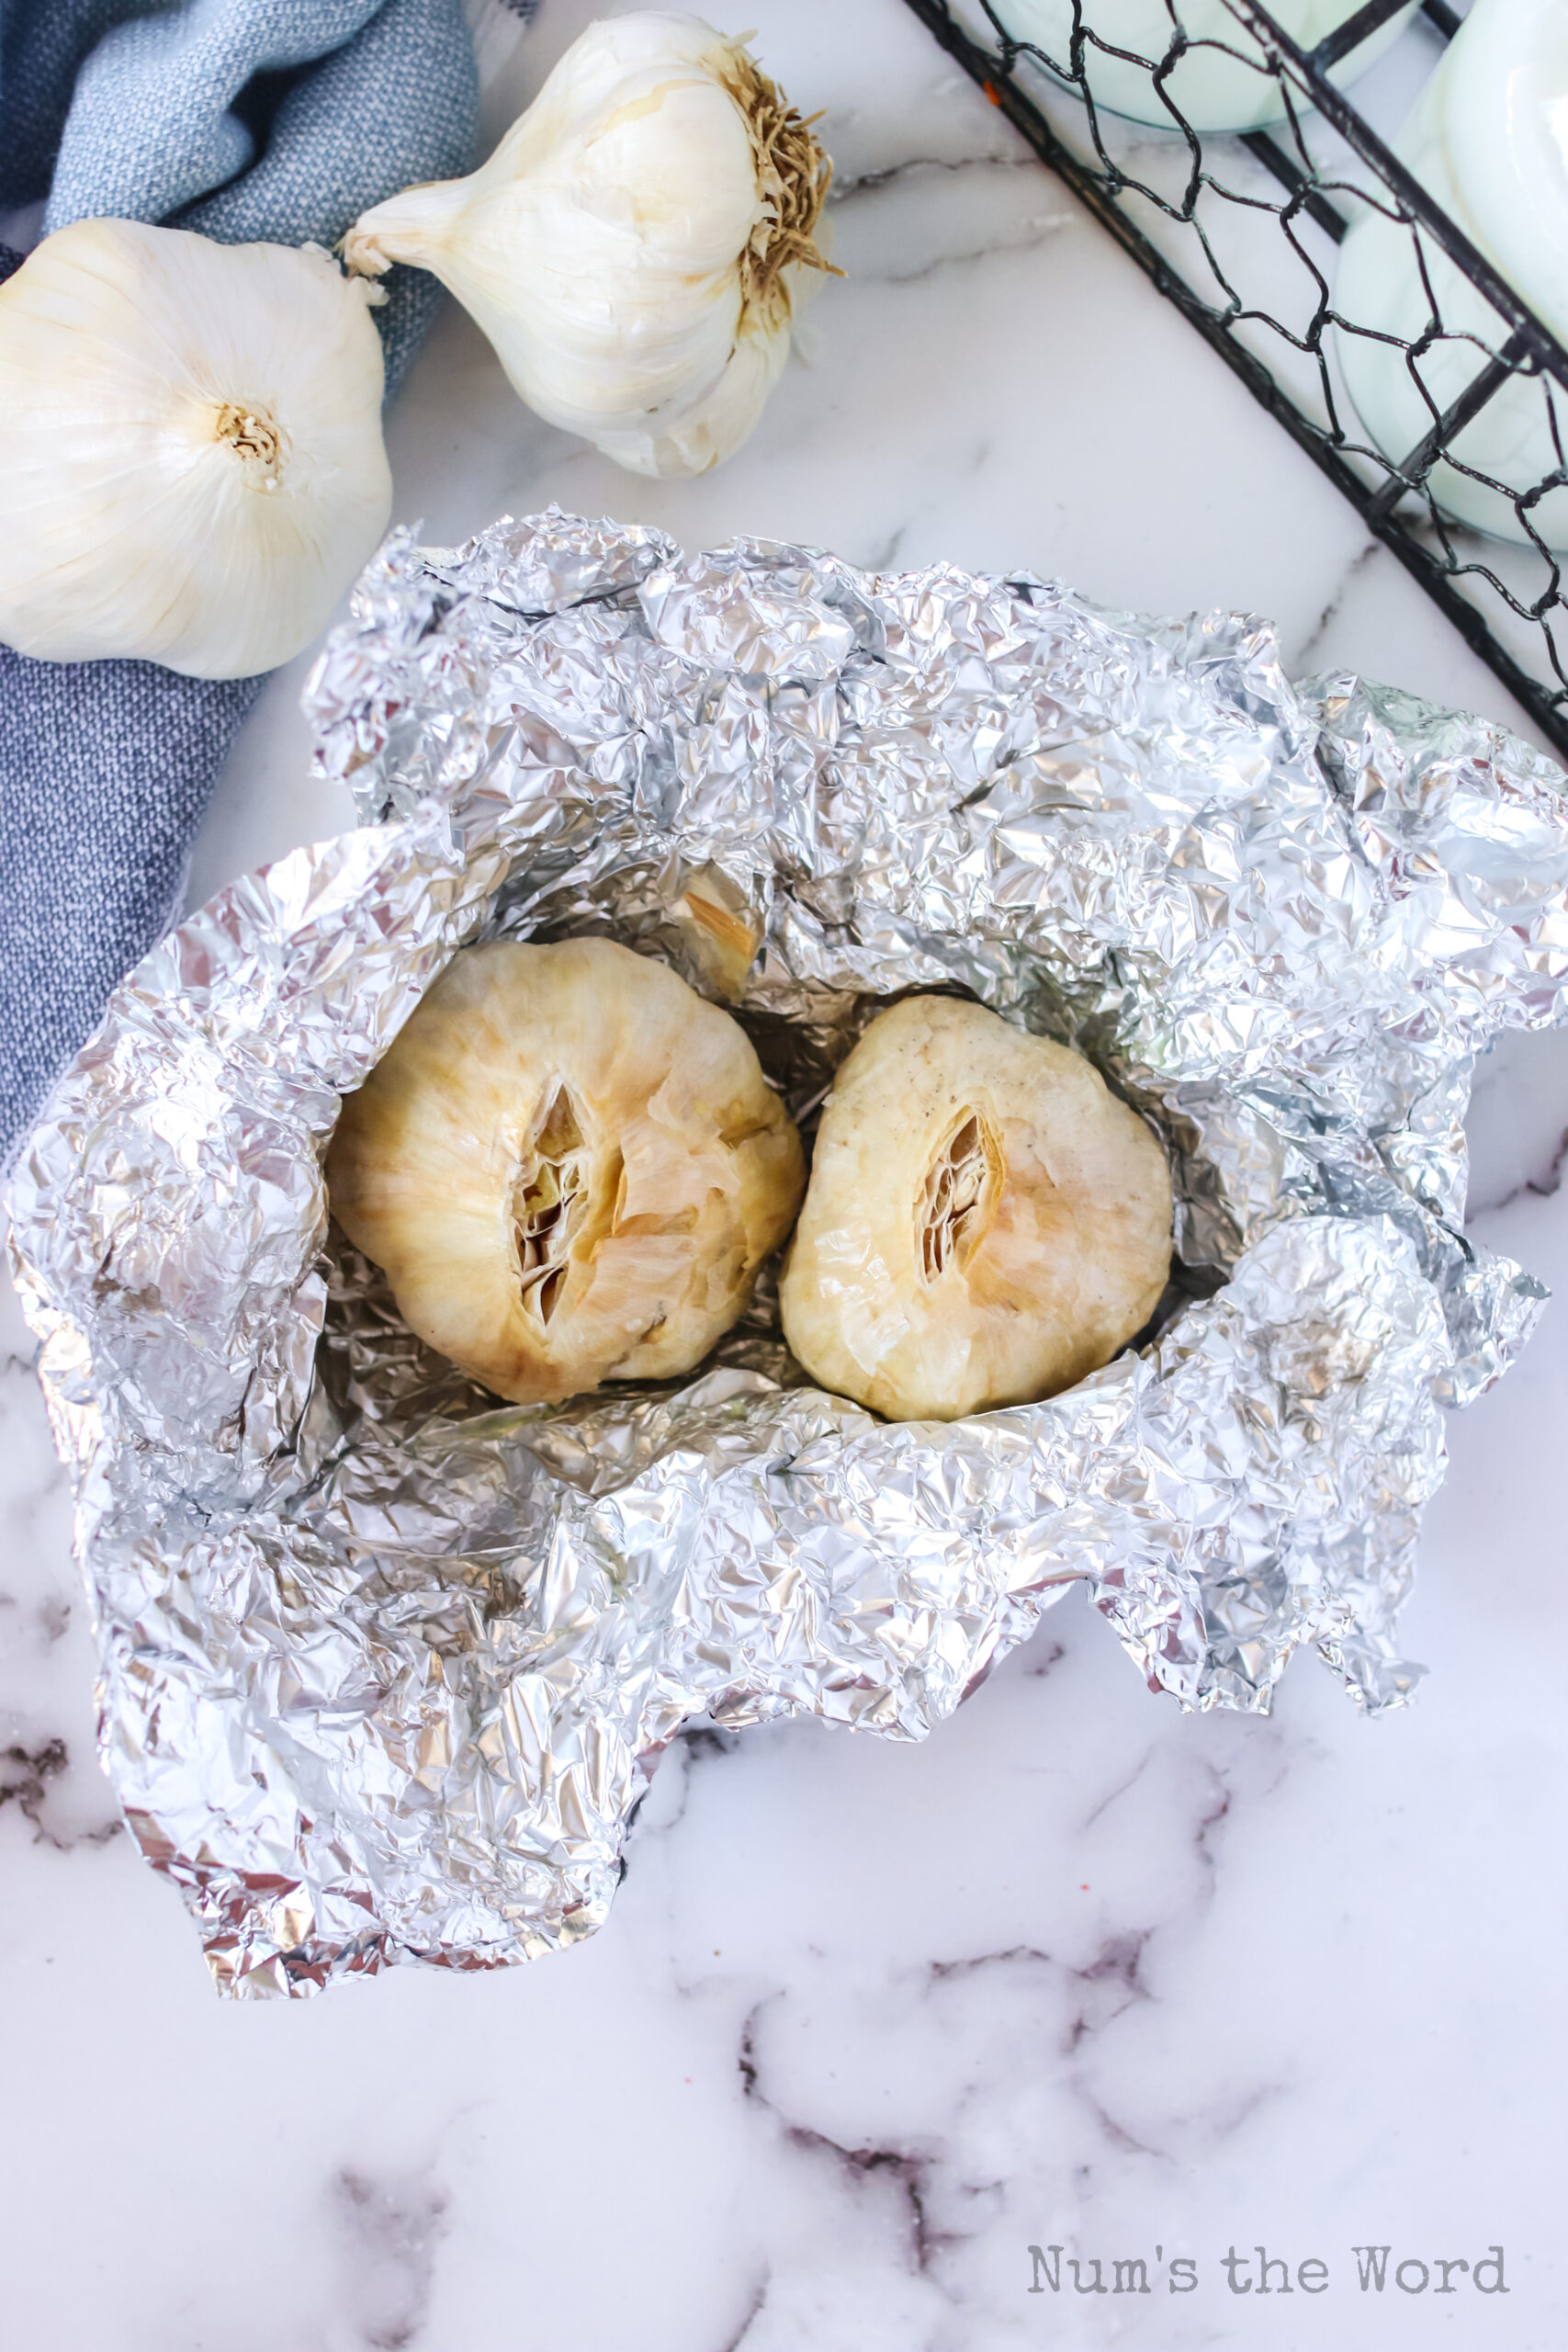 oven roasted garlic and oil in foil